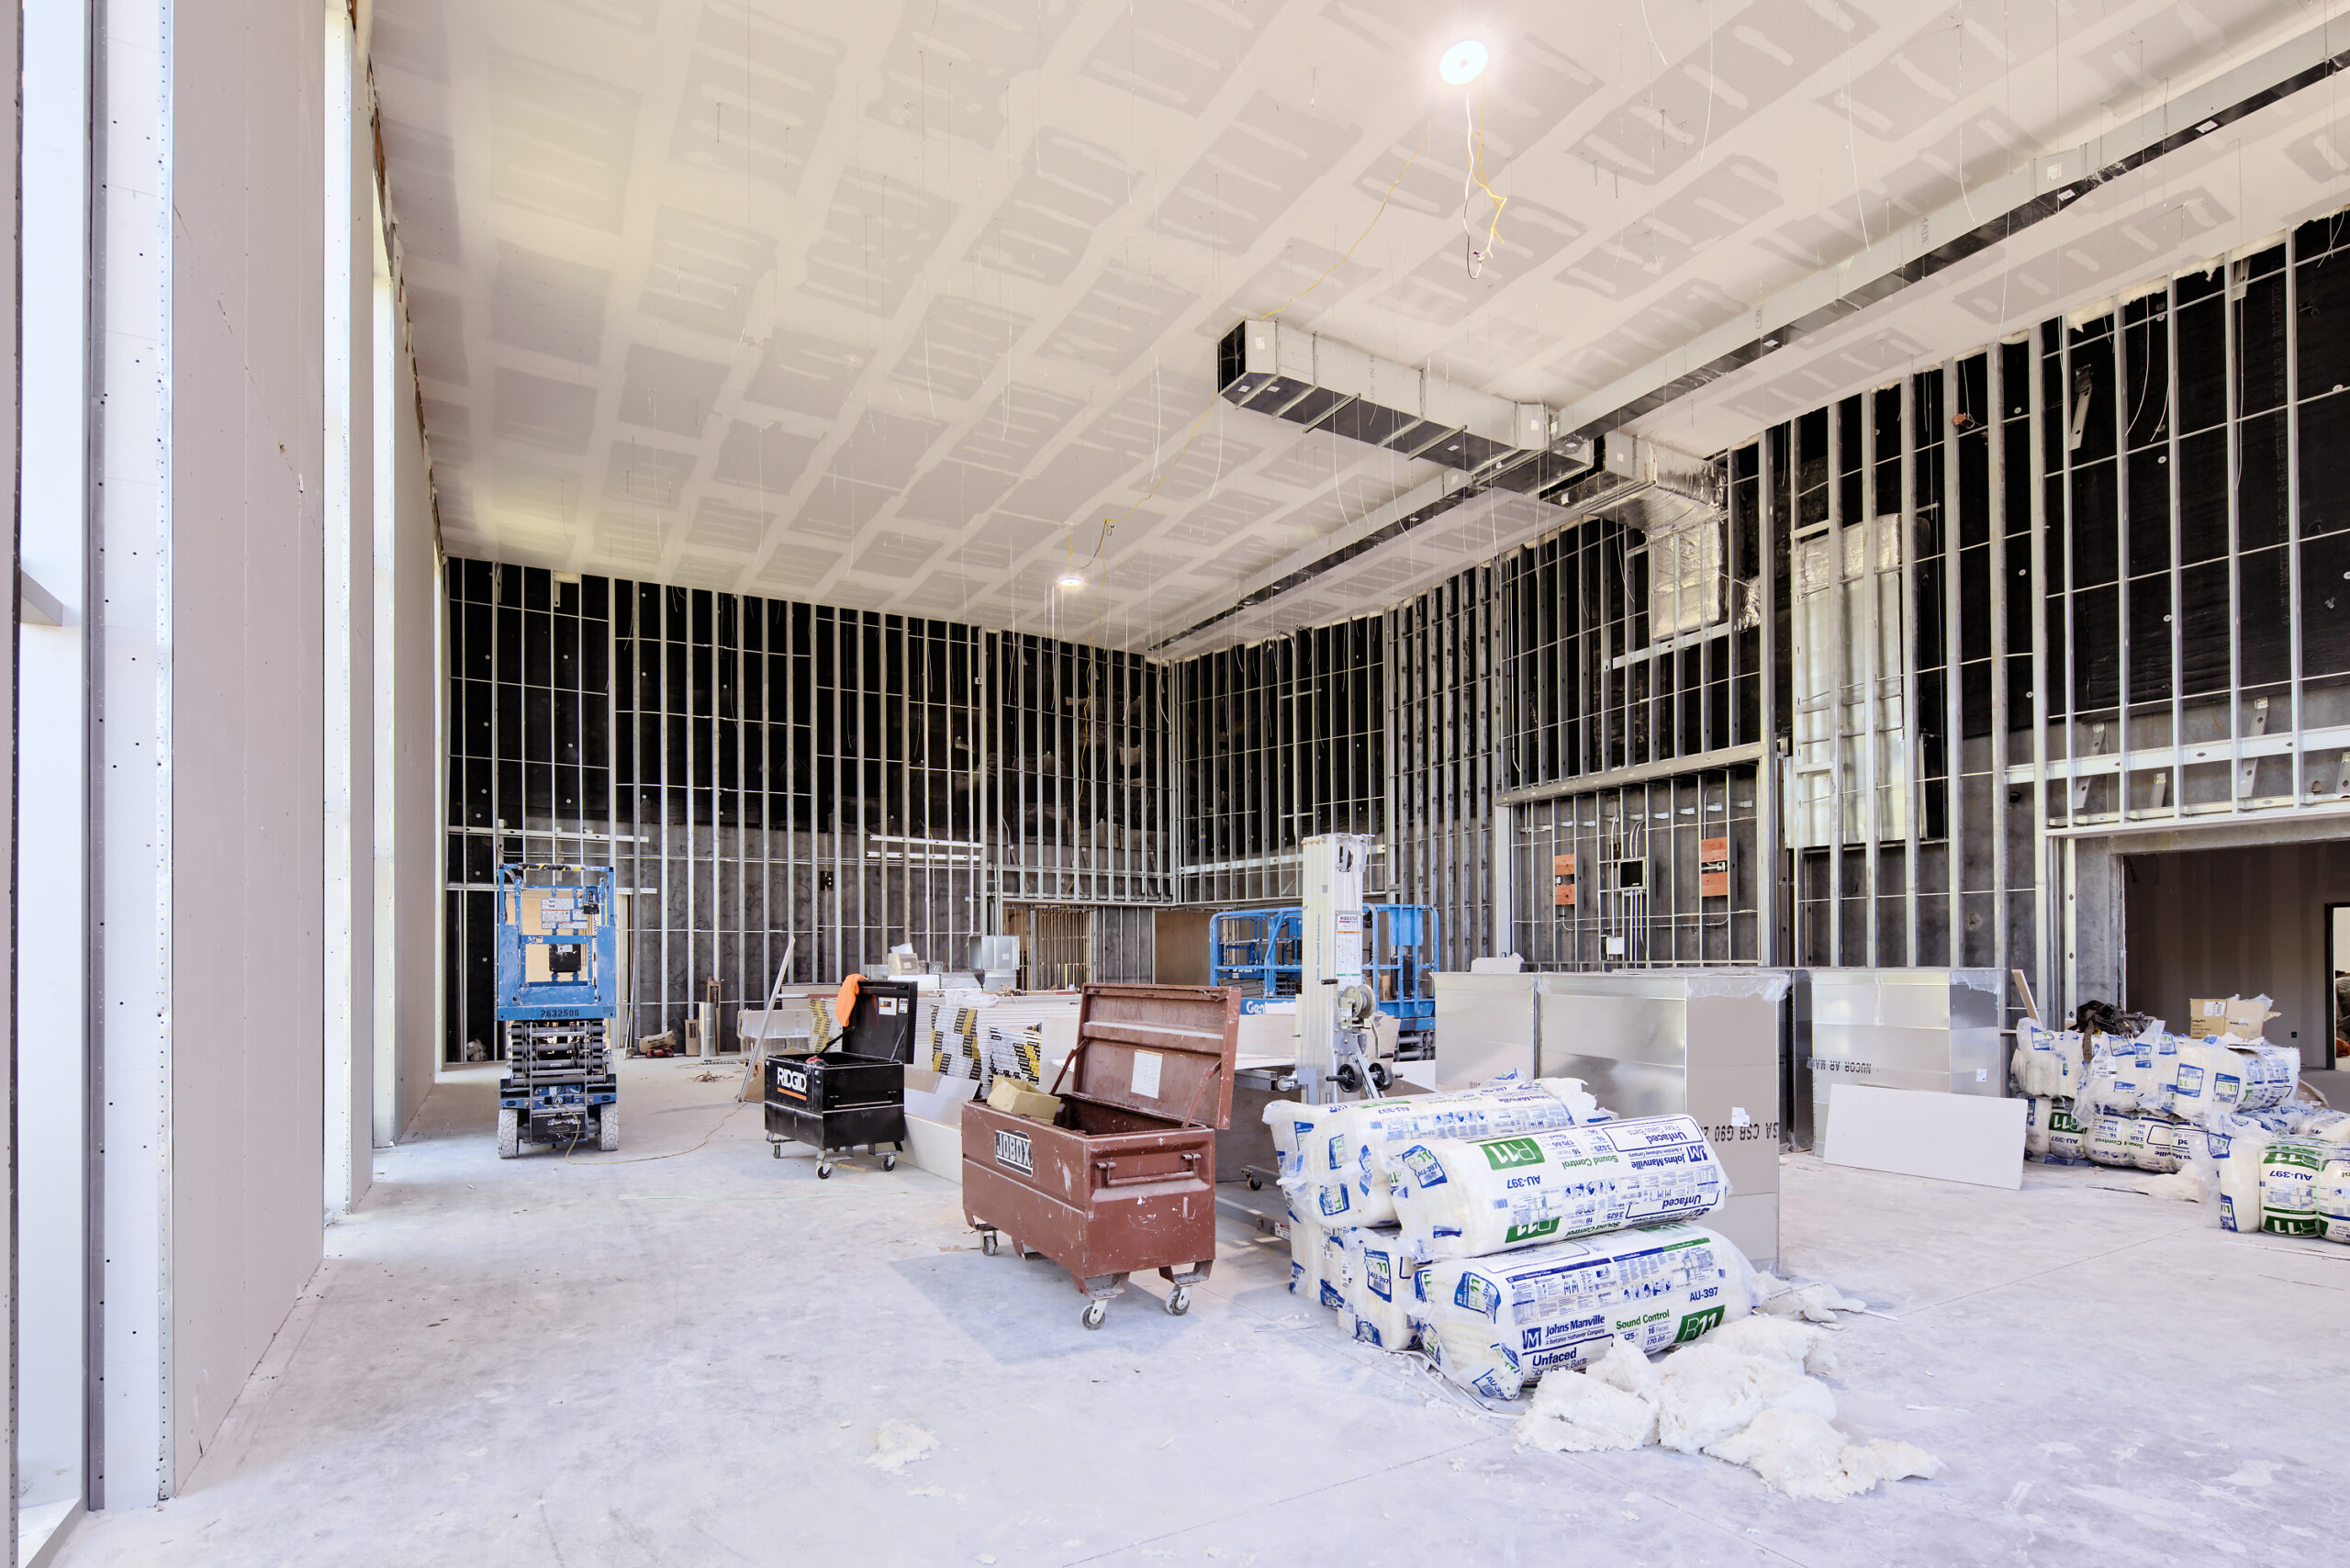 Building under construction. Interior, large room with tiled ceiling, stacks of construction material and tools.